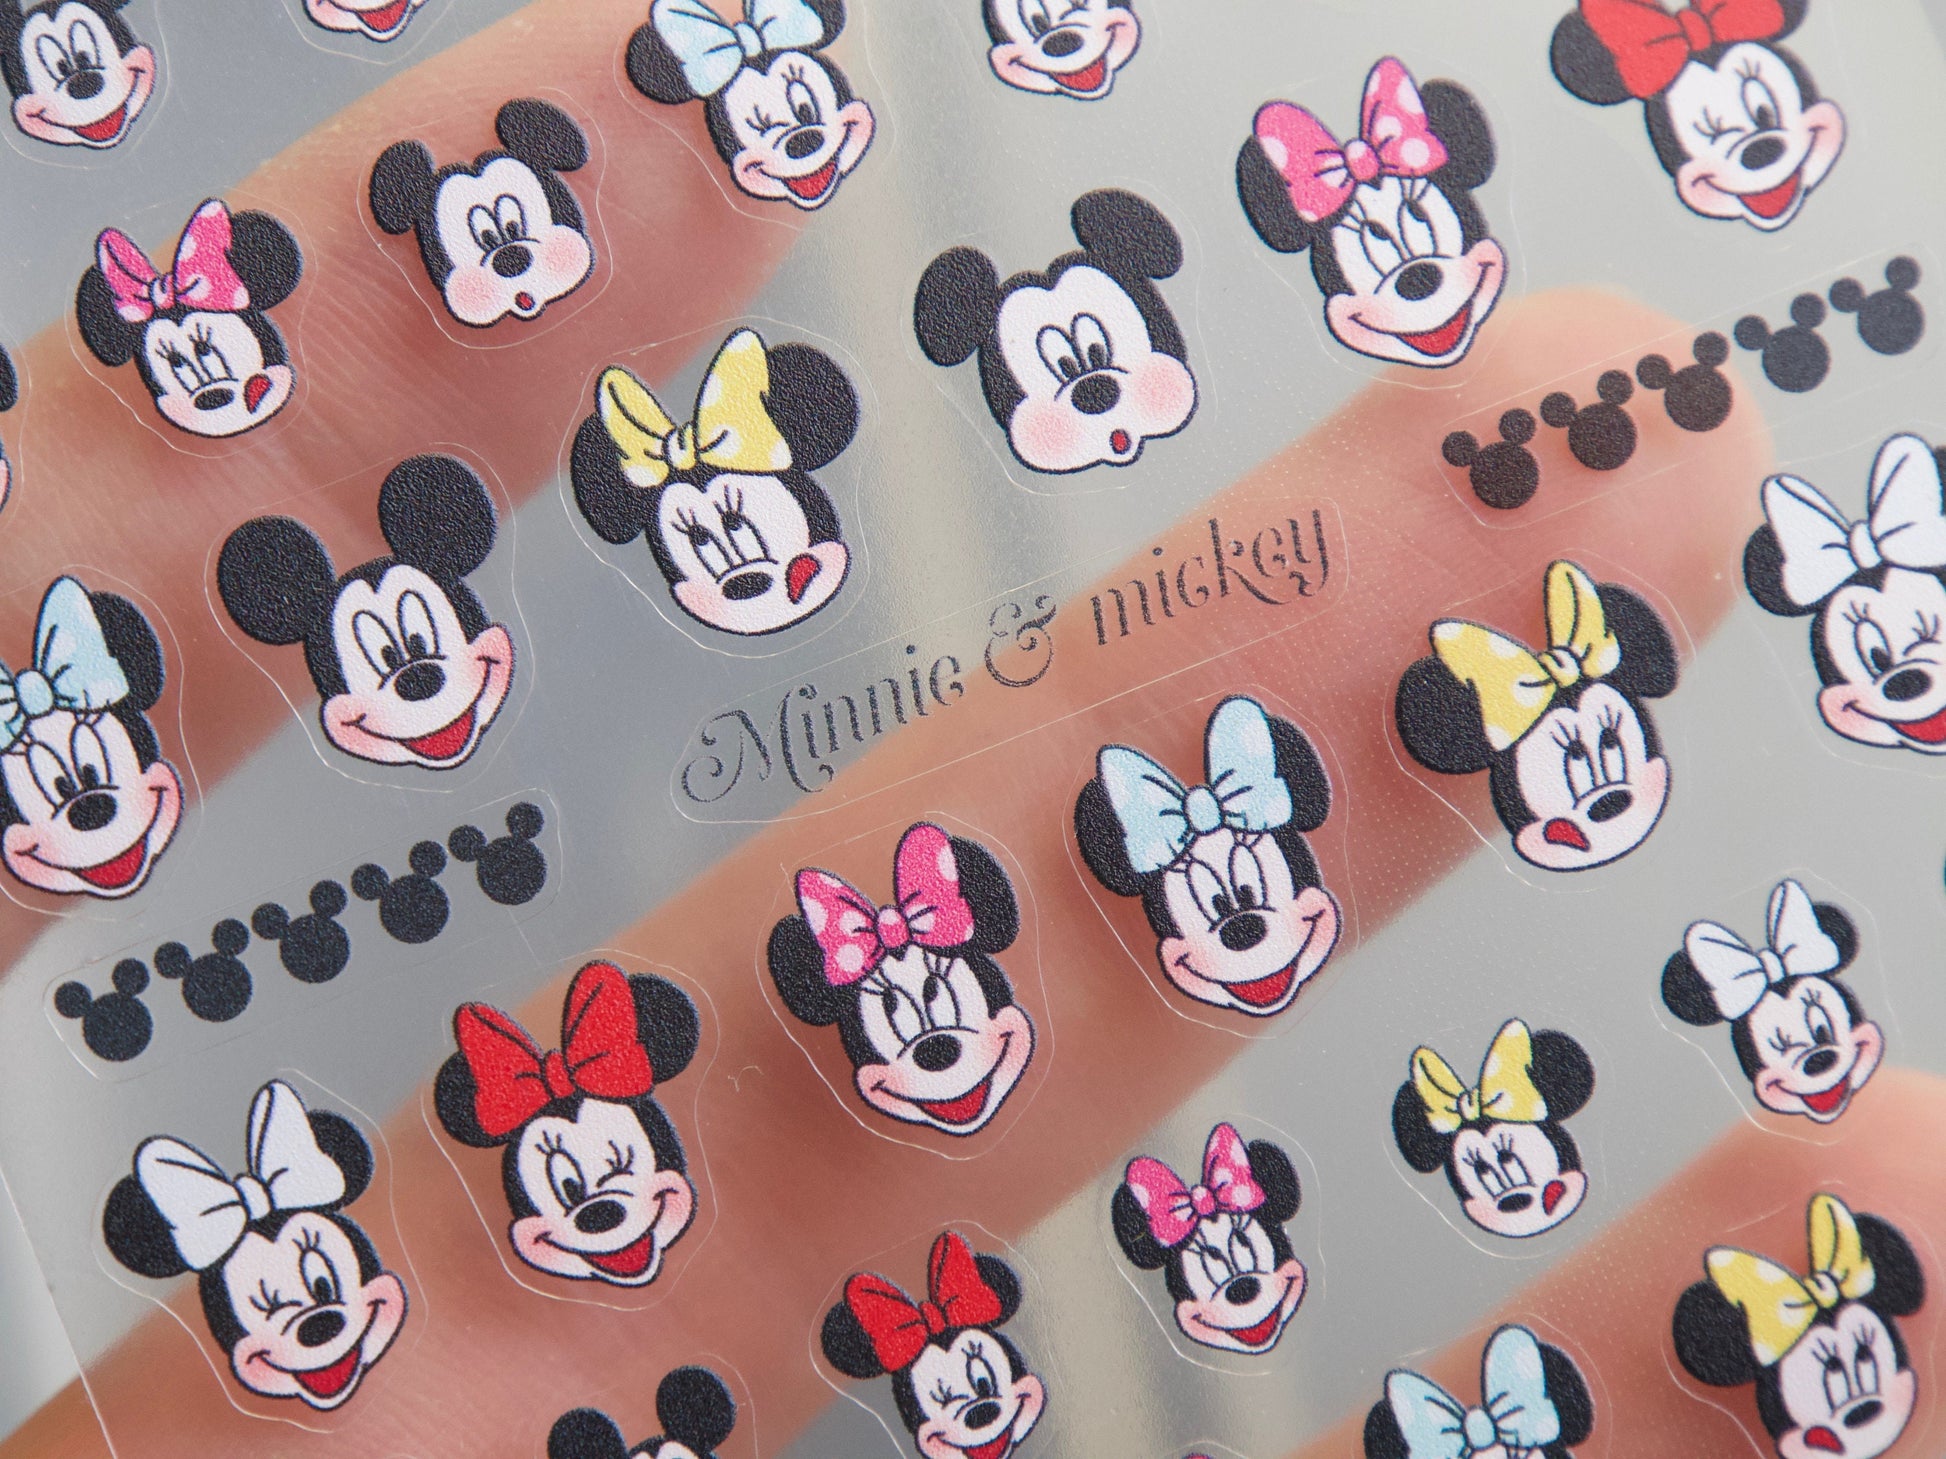 Mickey Mouse Minnie Mouse Ear Nail Decals/Disney Theme nail sticker/Pro Ultra Thin Mouse Head Self Adhesive Decals/ Cartoon Miniature